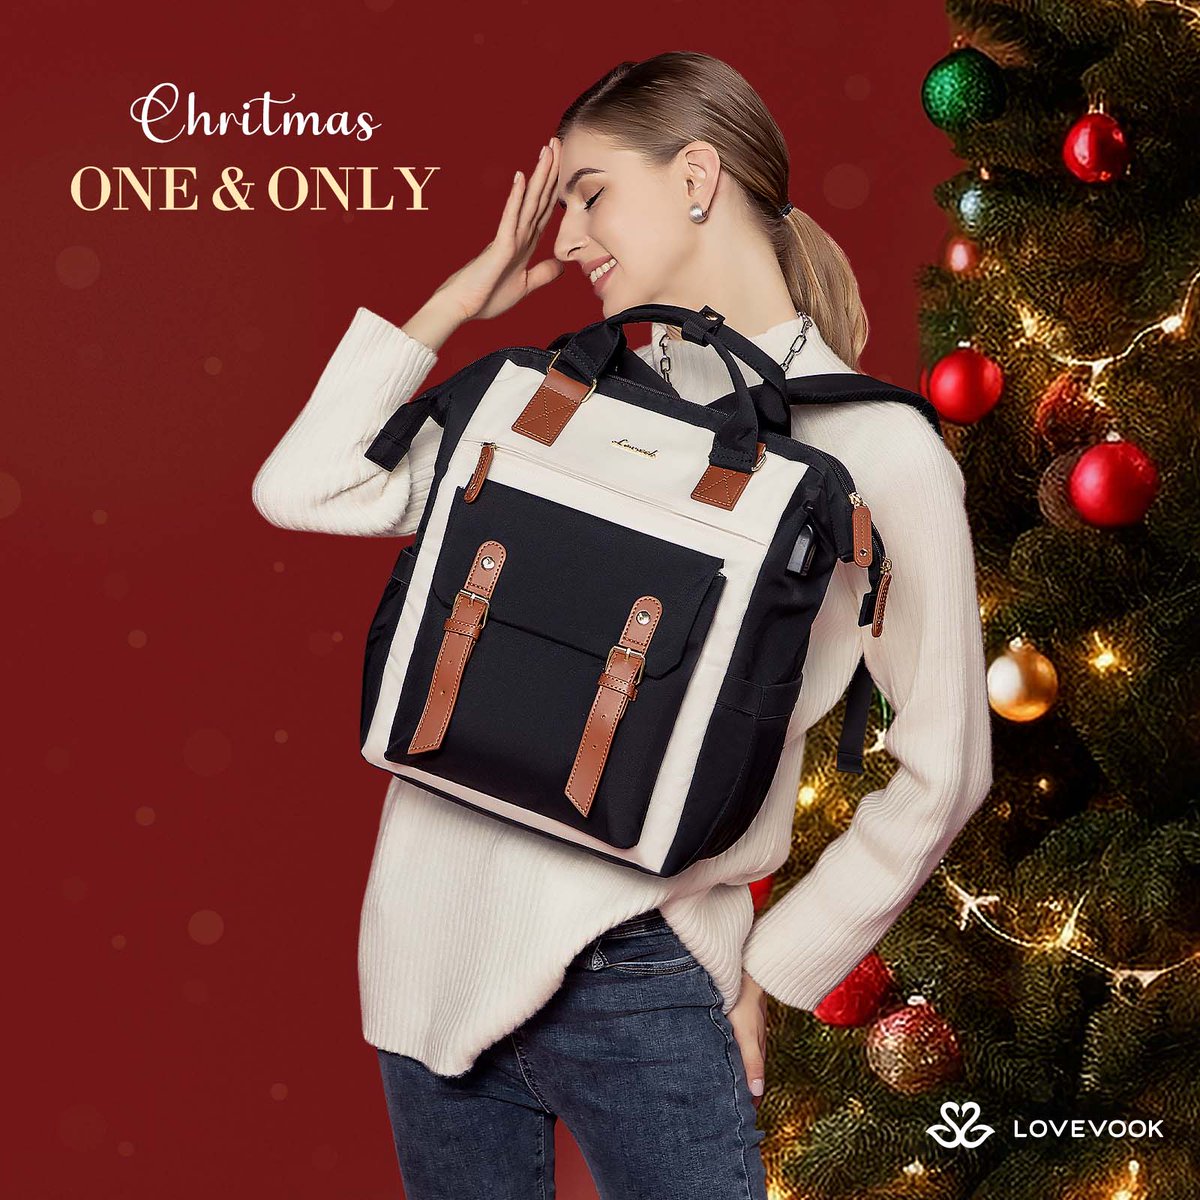 Dashing through the holidays with my festive backpack🎁
.
Snag the deals on Amazon✨:  amzn.to/3GD4mb5
on LOVEVOOK✨: bit.ly/3TilHgW
.
#lovevook #oneandonlyLOVEVOOK #christmas #giftideas #wishlist #gift #christmasgift #amazon #AmazonHaul #tiktokmademebuyit